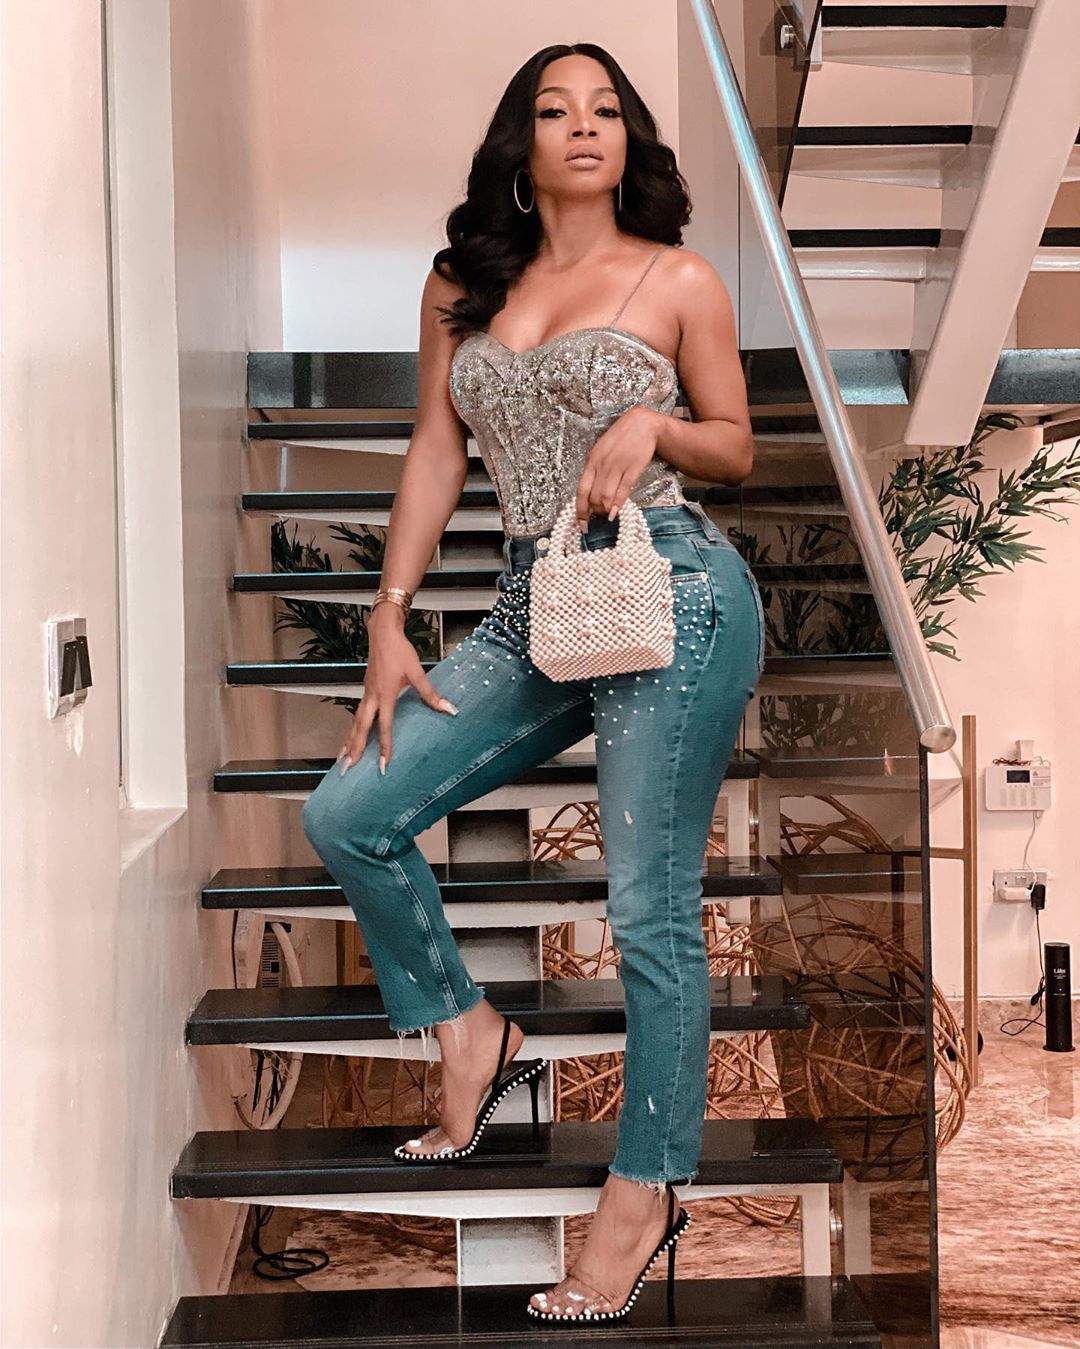 'African parents are the world's worst; they ruined our lives' - Toke Makinwa